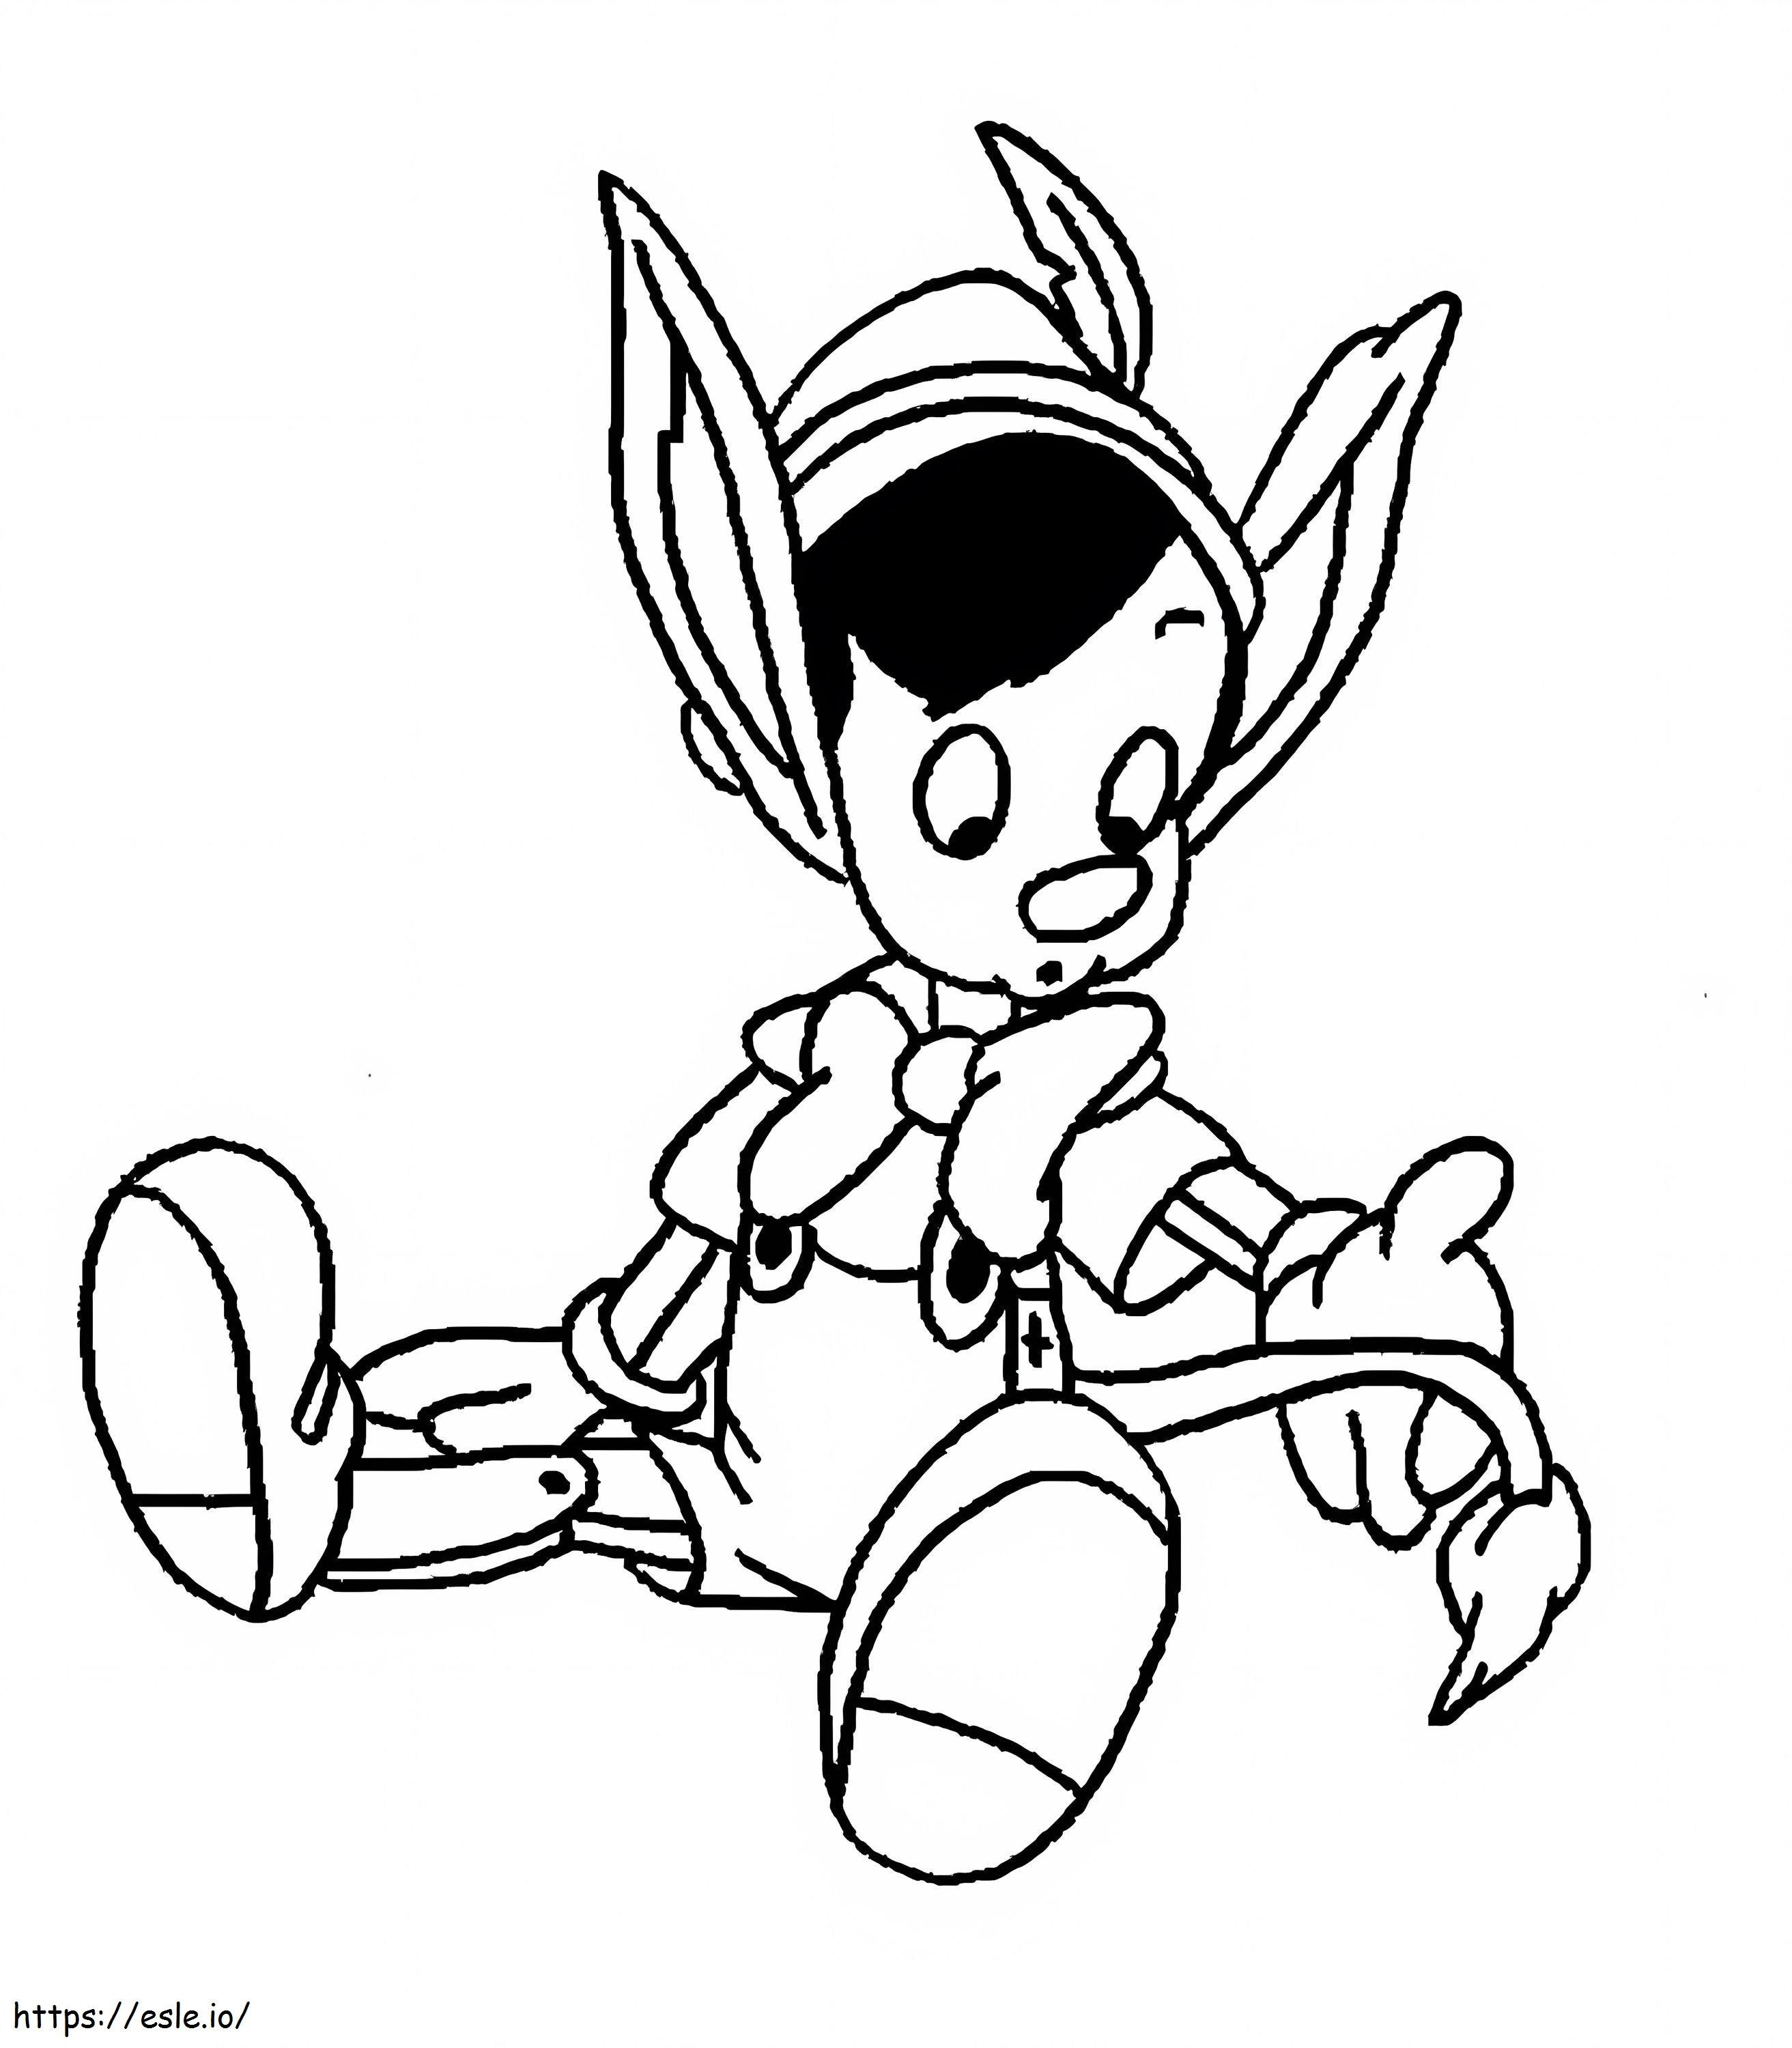 Sitting Pinocchio coloring page